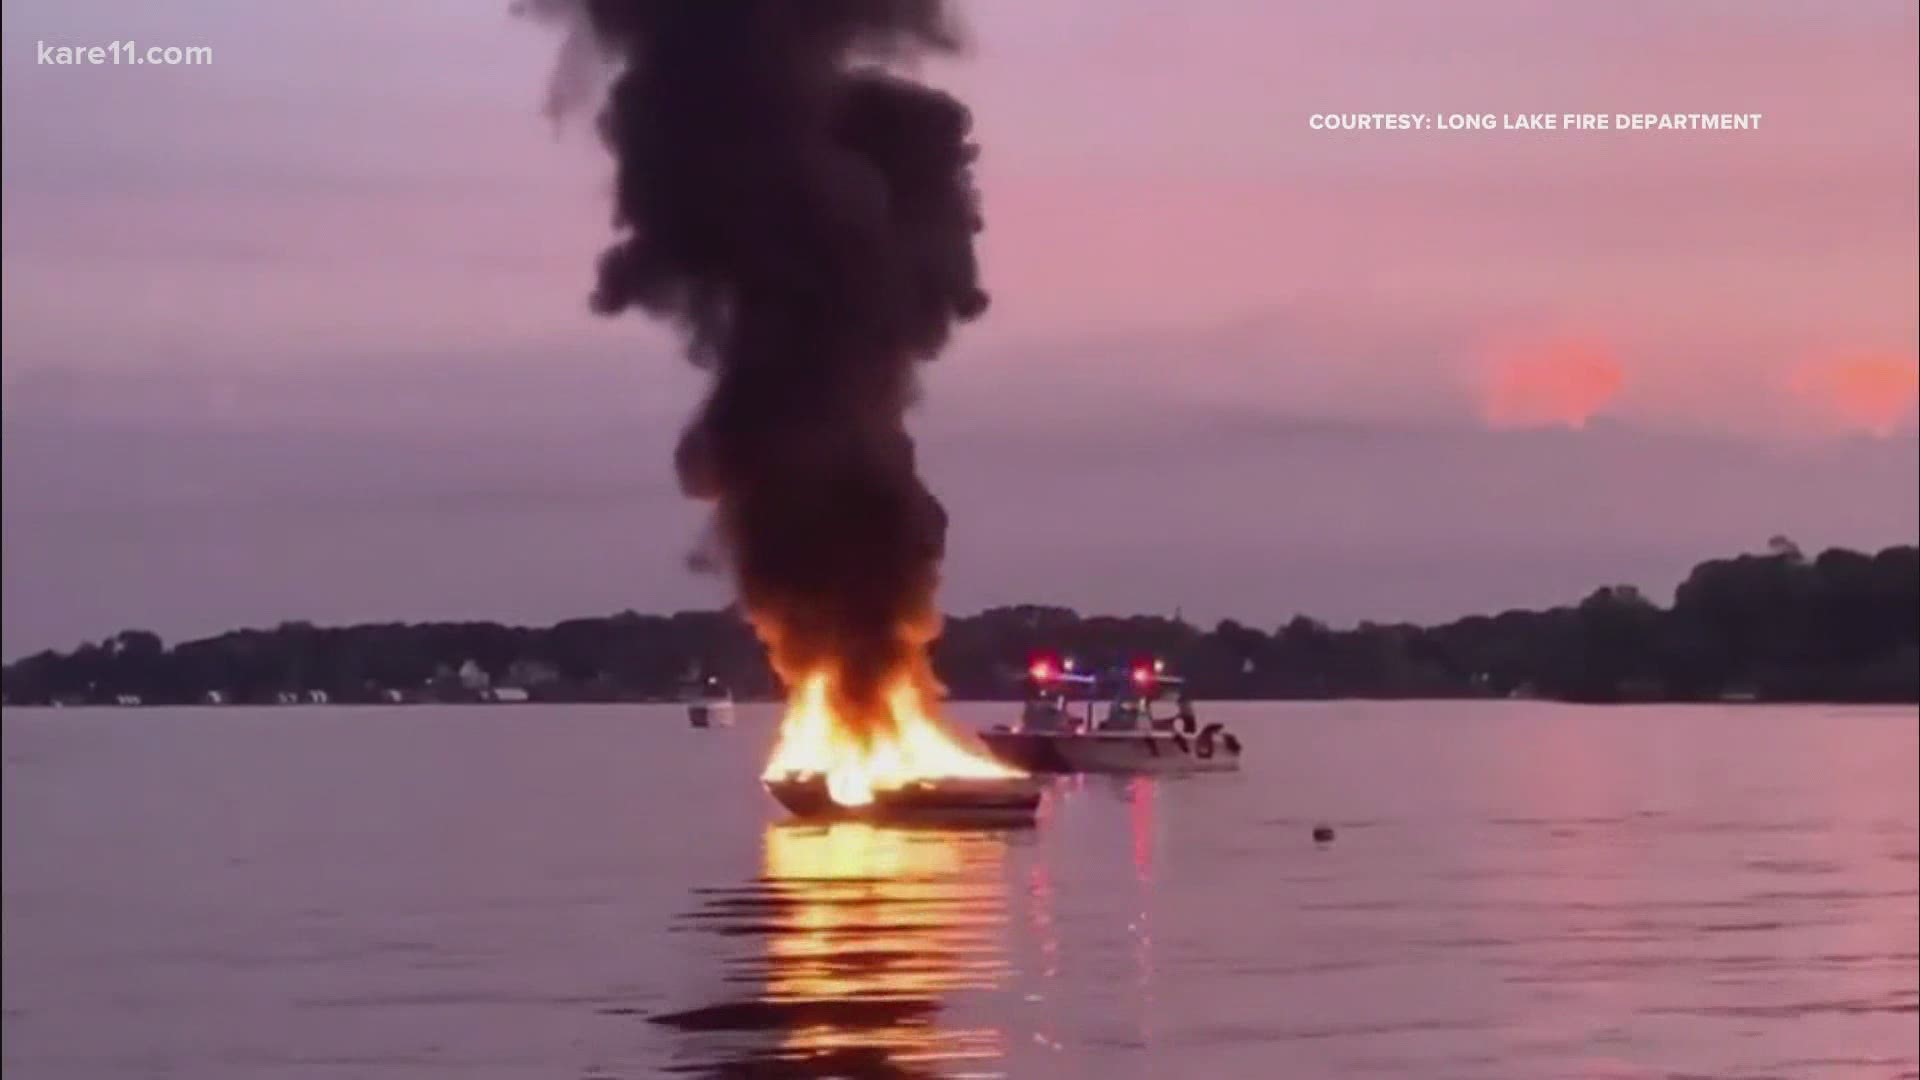 The Long Lake Fire Department responded to a boat fire on Lake Minnetonka near Smith's Bay on Sunday evening, according to their Facebook page.